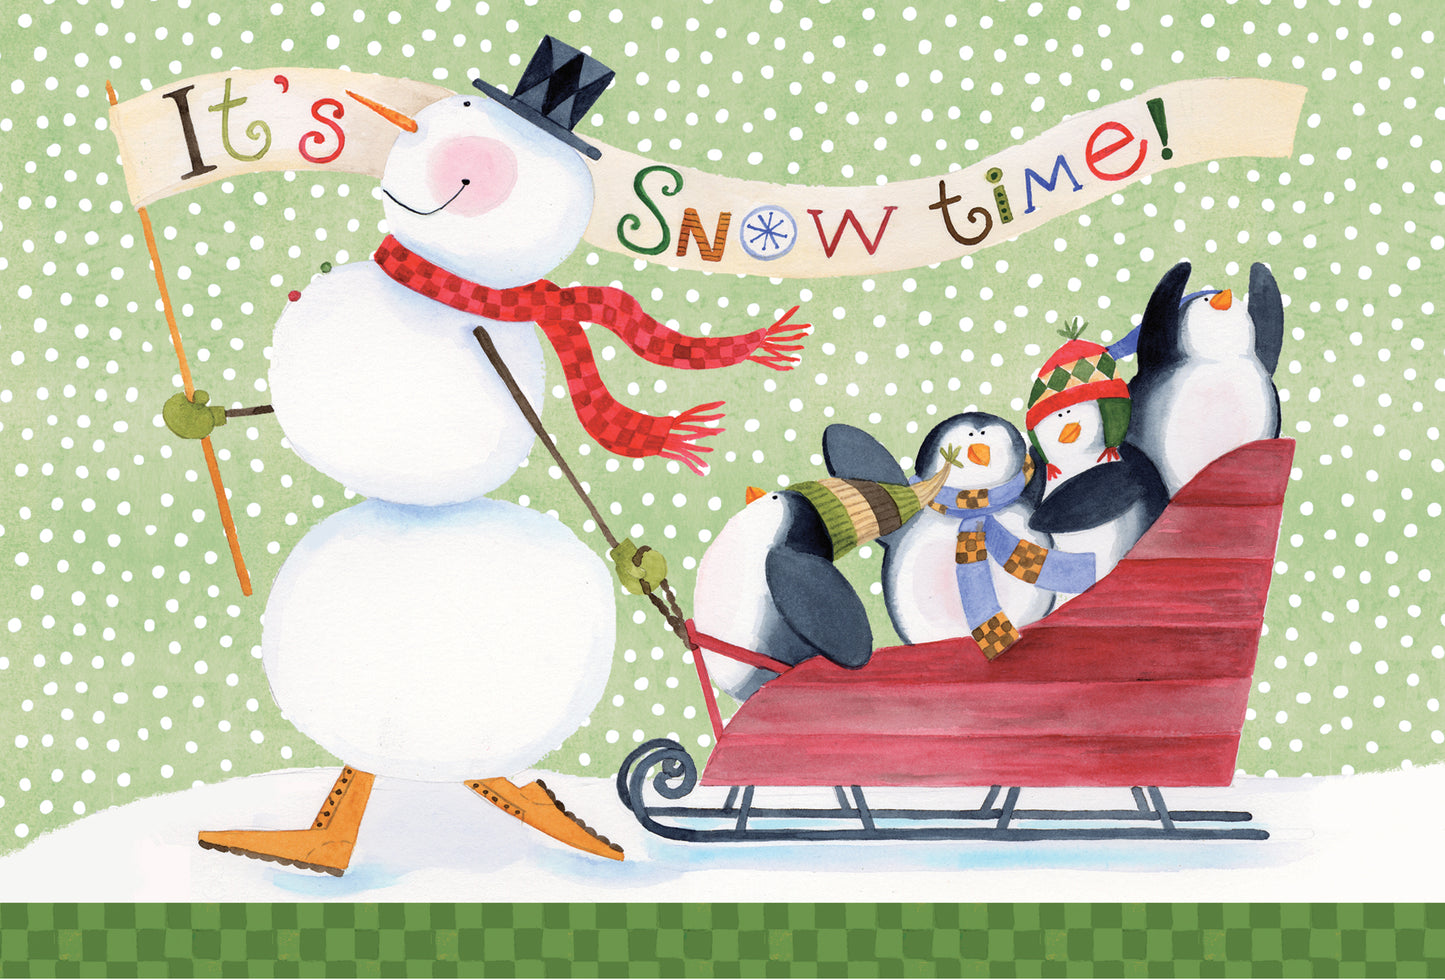 It's Snow Time! - Christmas Card - Cardmore